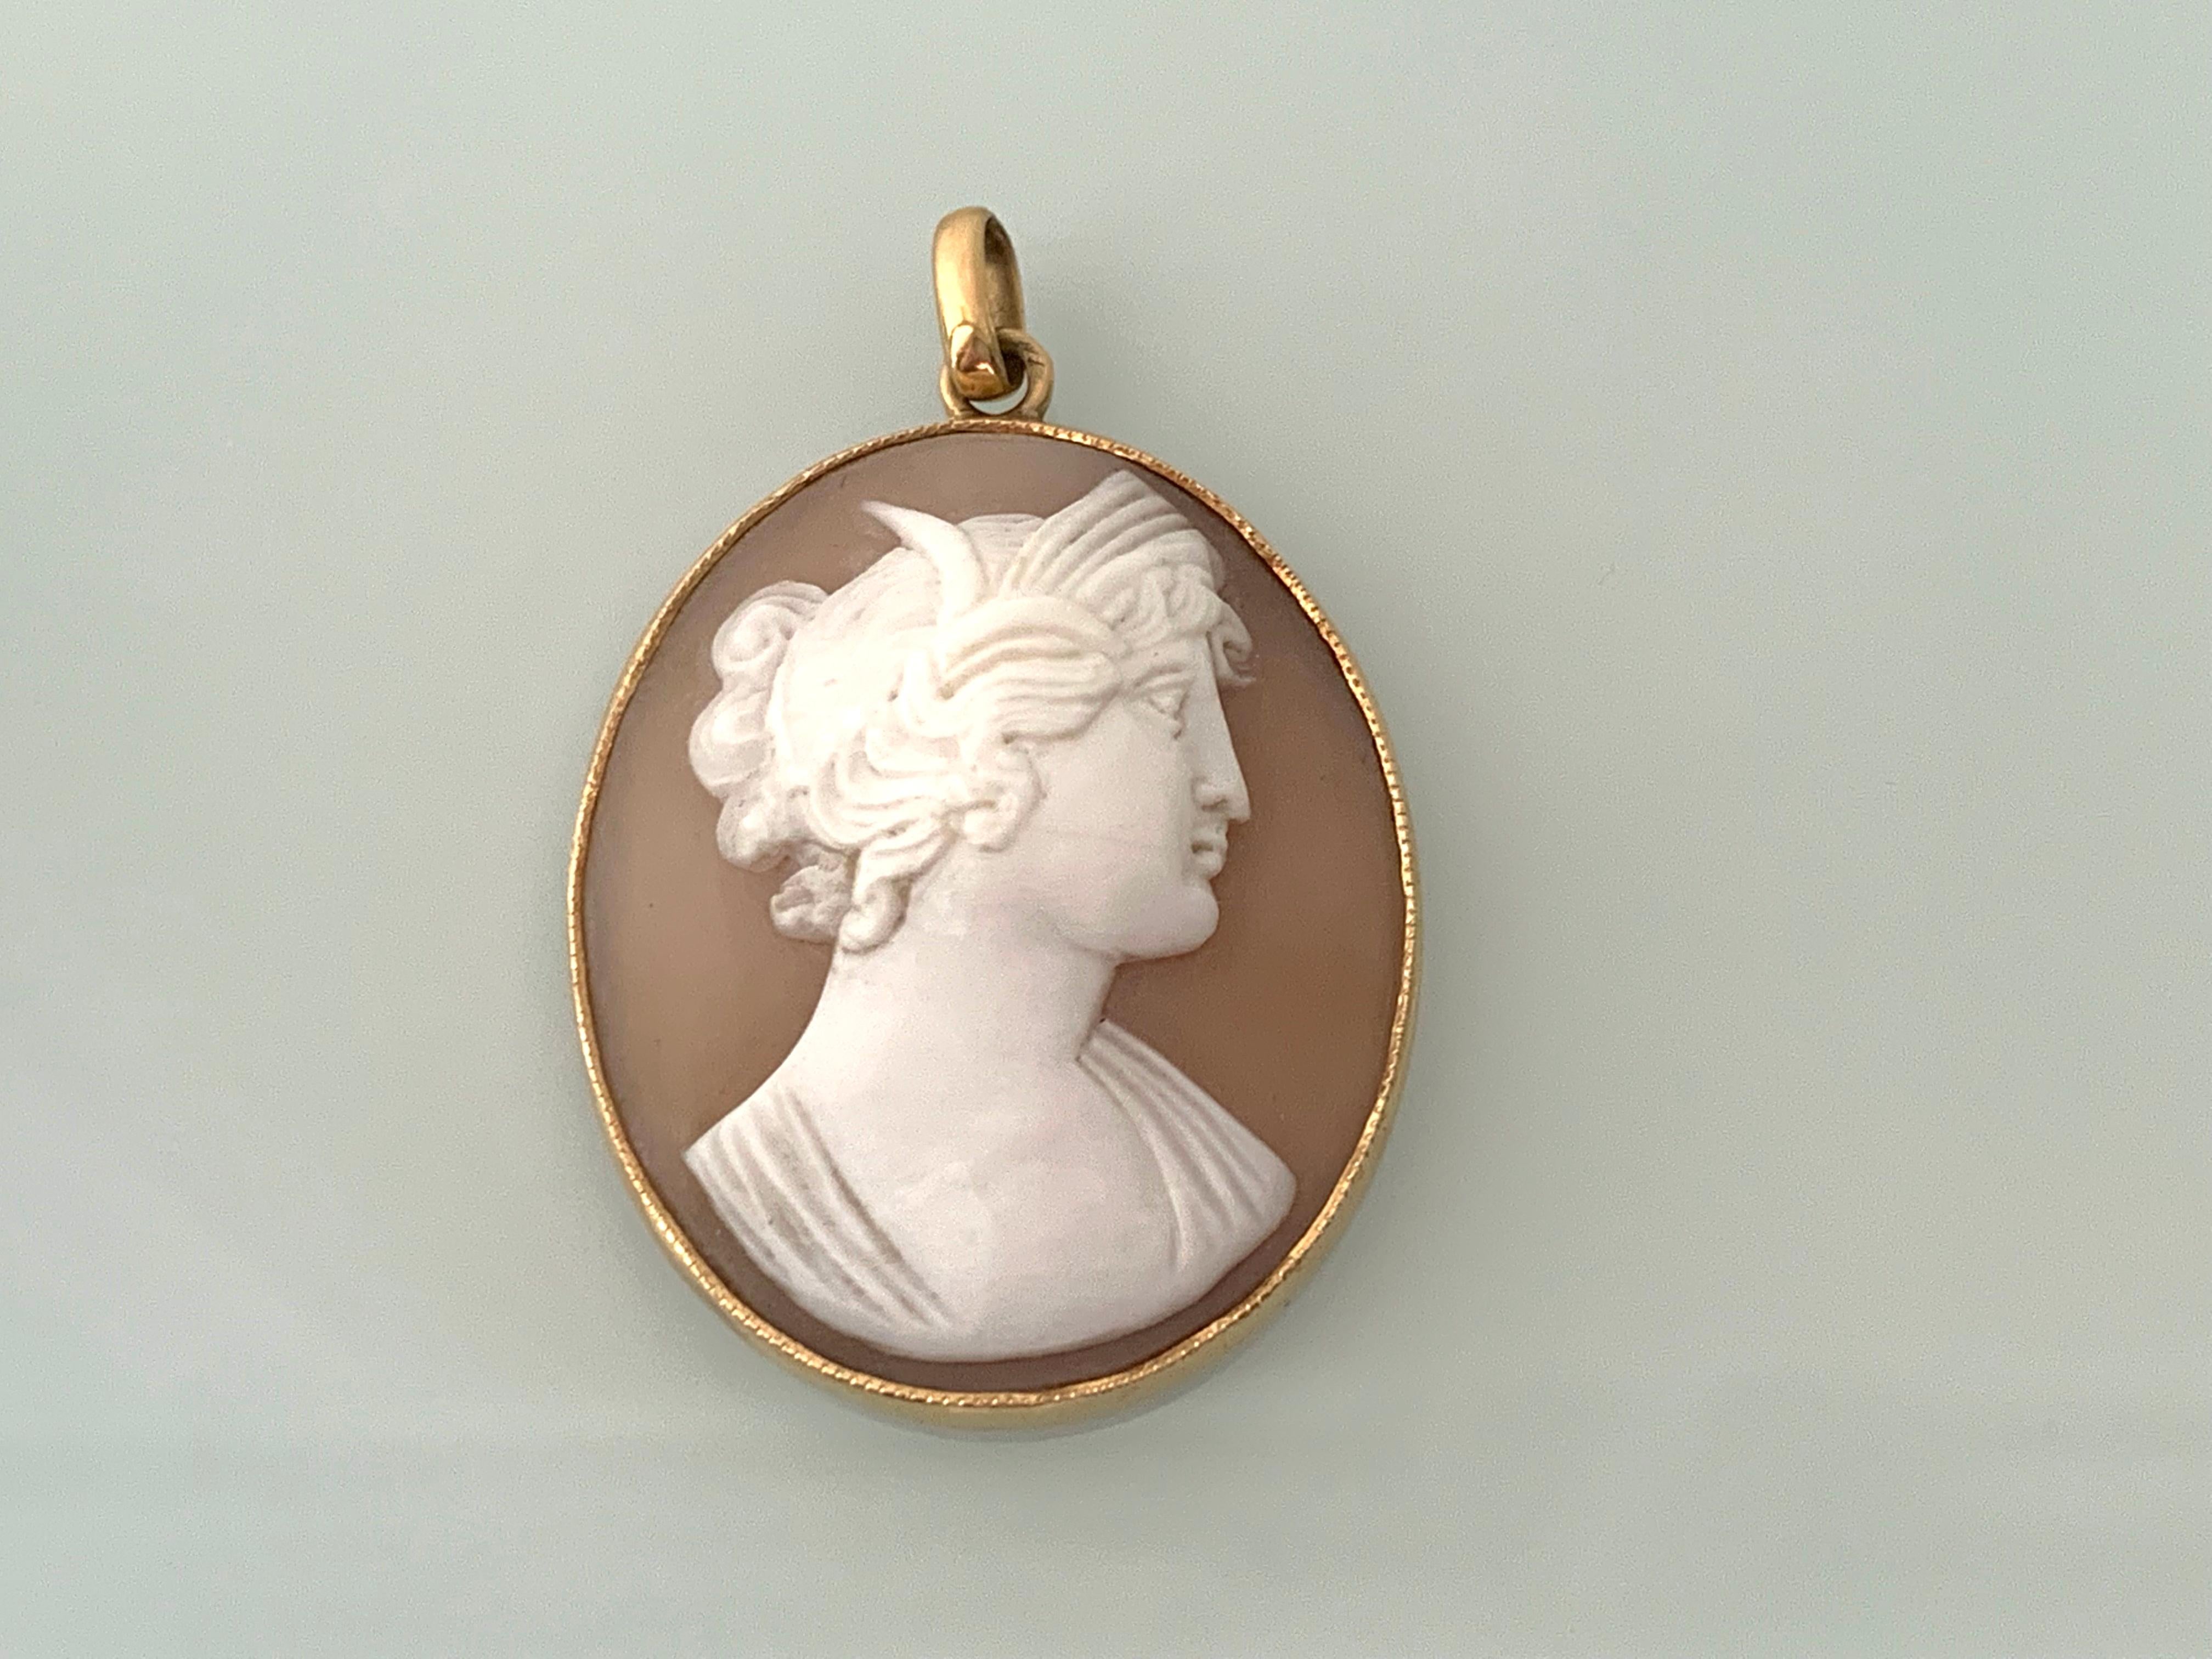 15ct Gold Antique Cameo Pendant
European Origin 
Late 19th Century
Marked heavily on the bail 
Beautifully hand carved womens face